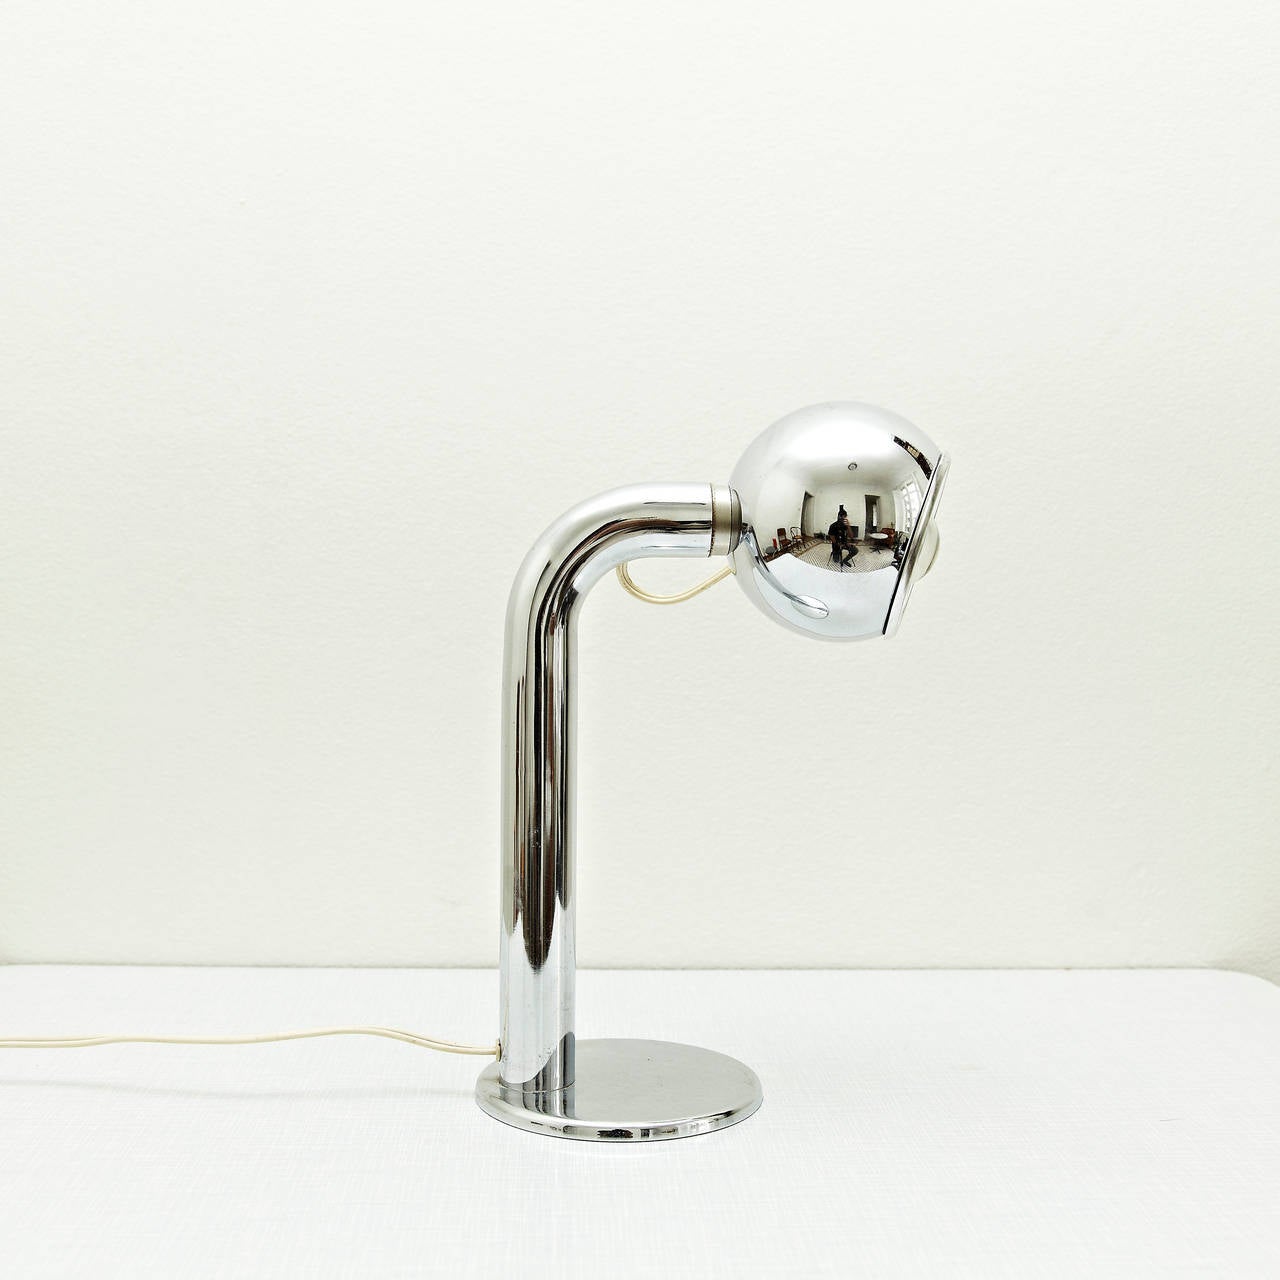 Italian Luci T414 Table Lamp with Magnet, circa 1960